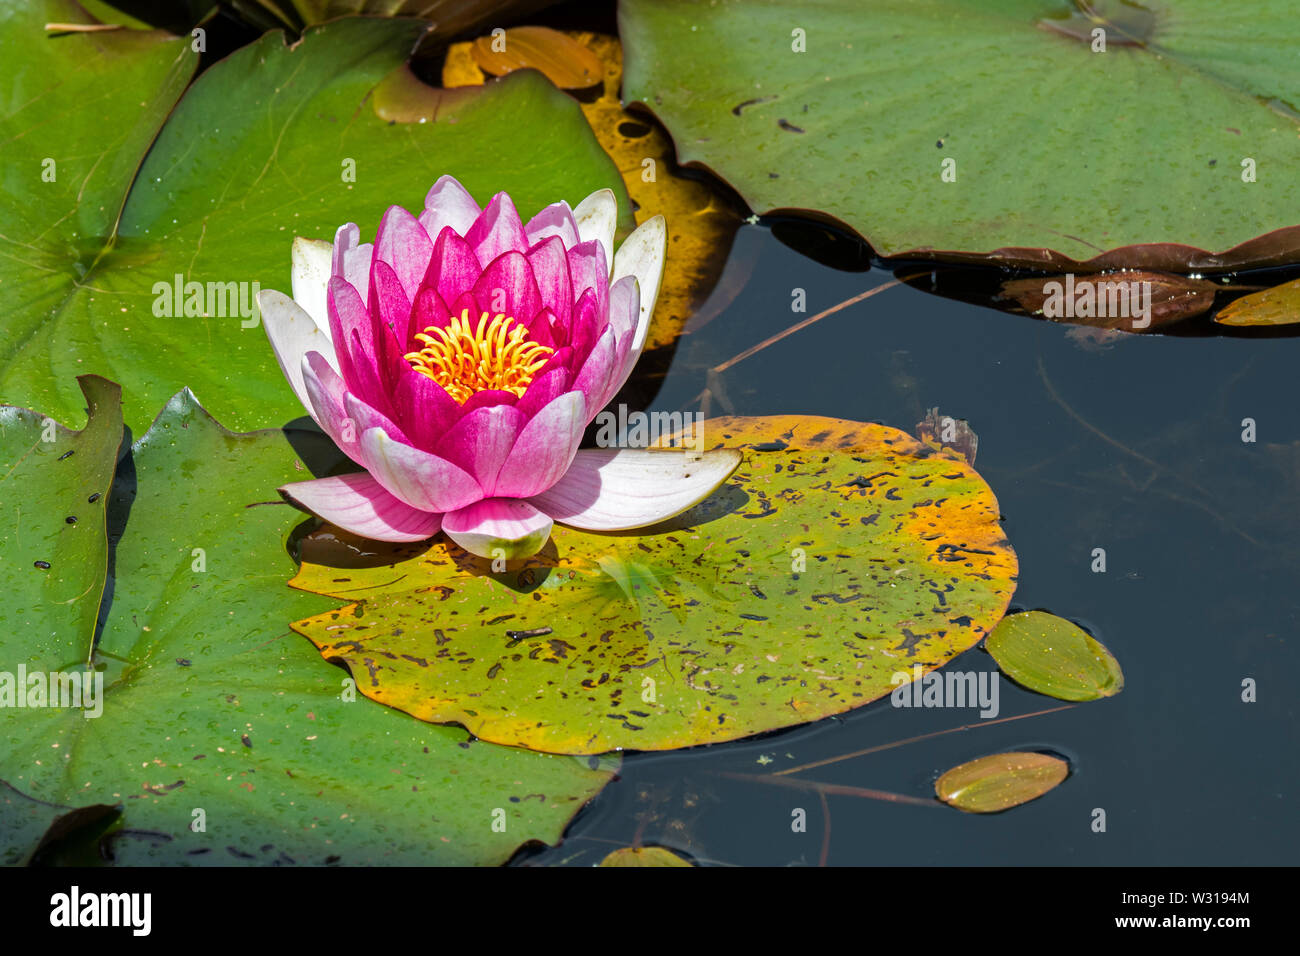 Pink cultivar of Nymphaea / water lily in flower in pond Stock Photo